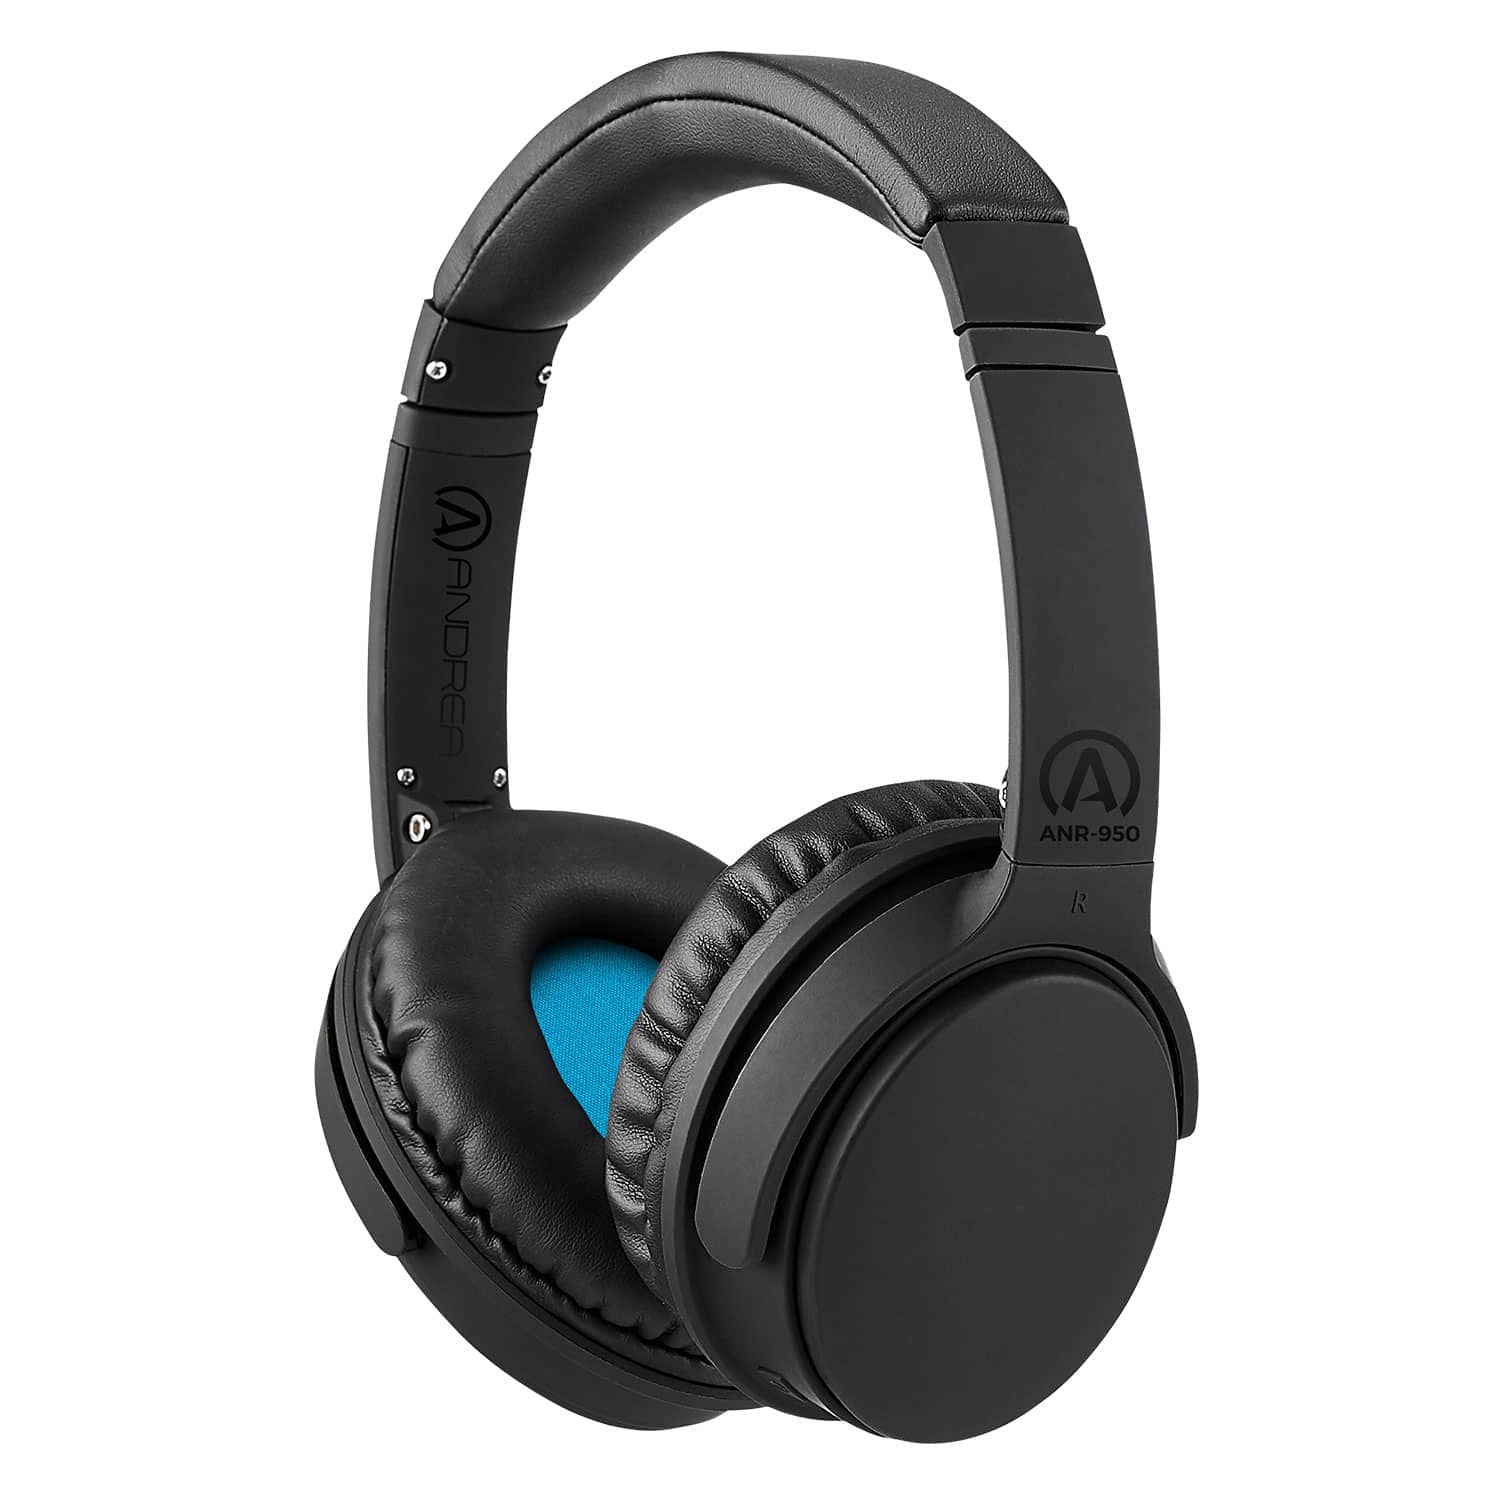 ANR-950 Wireless Bluetooth Headphones With Active Noise Reduction